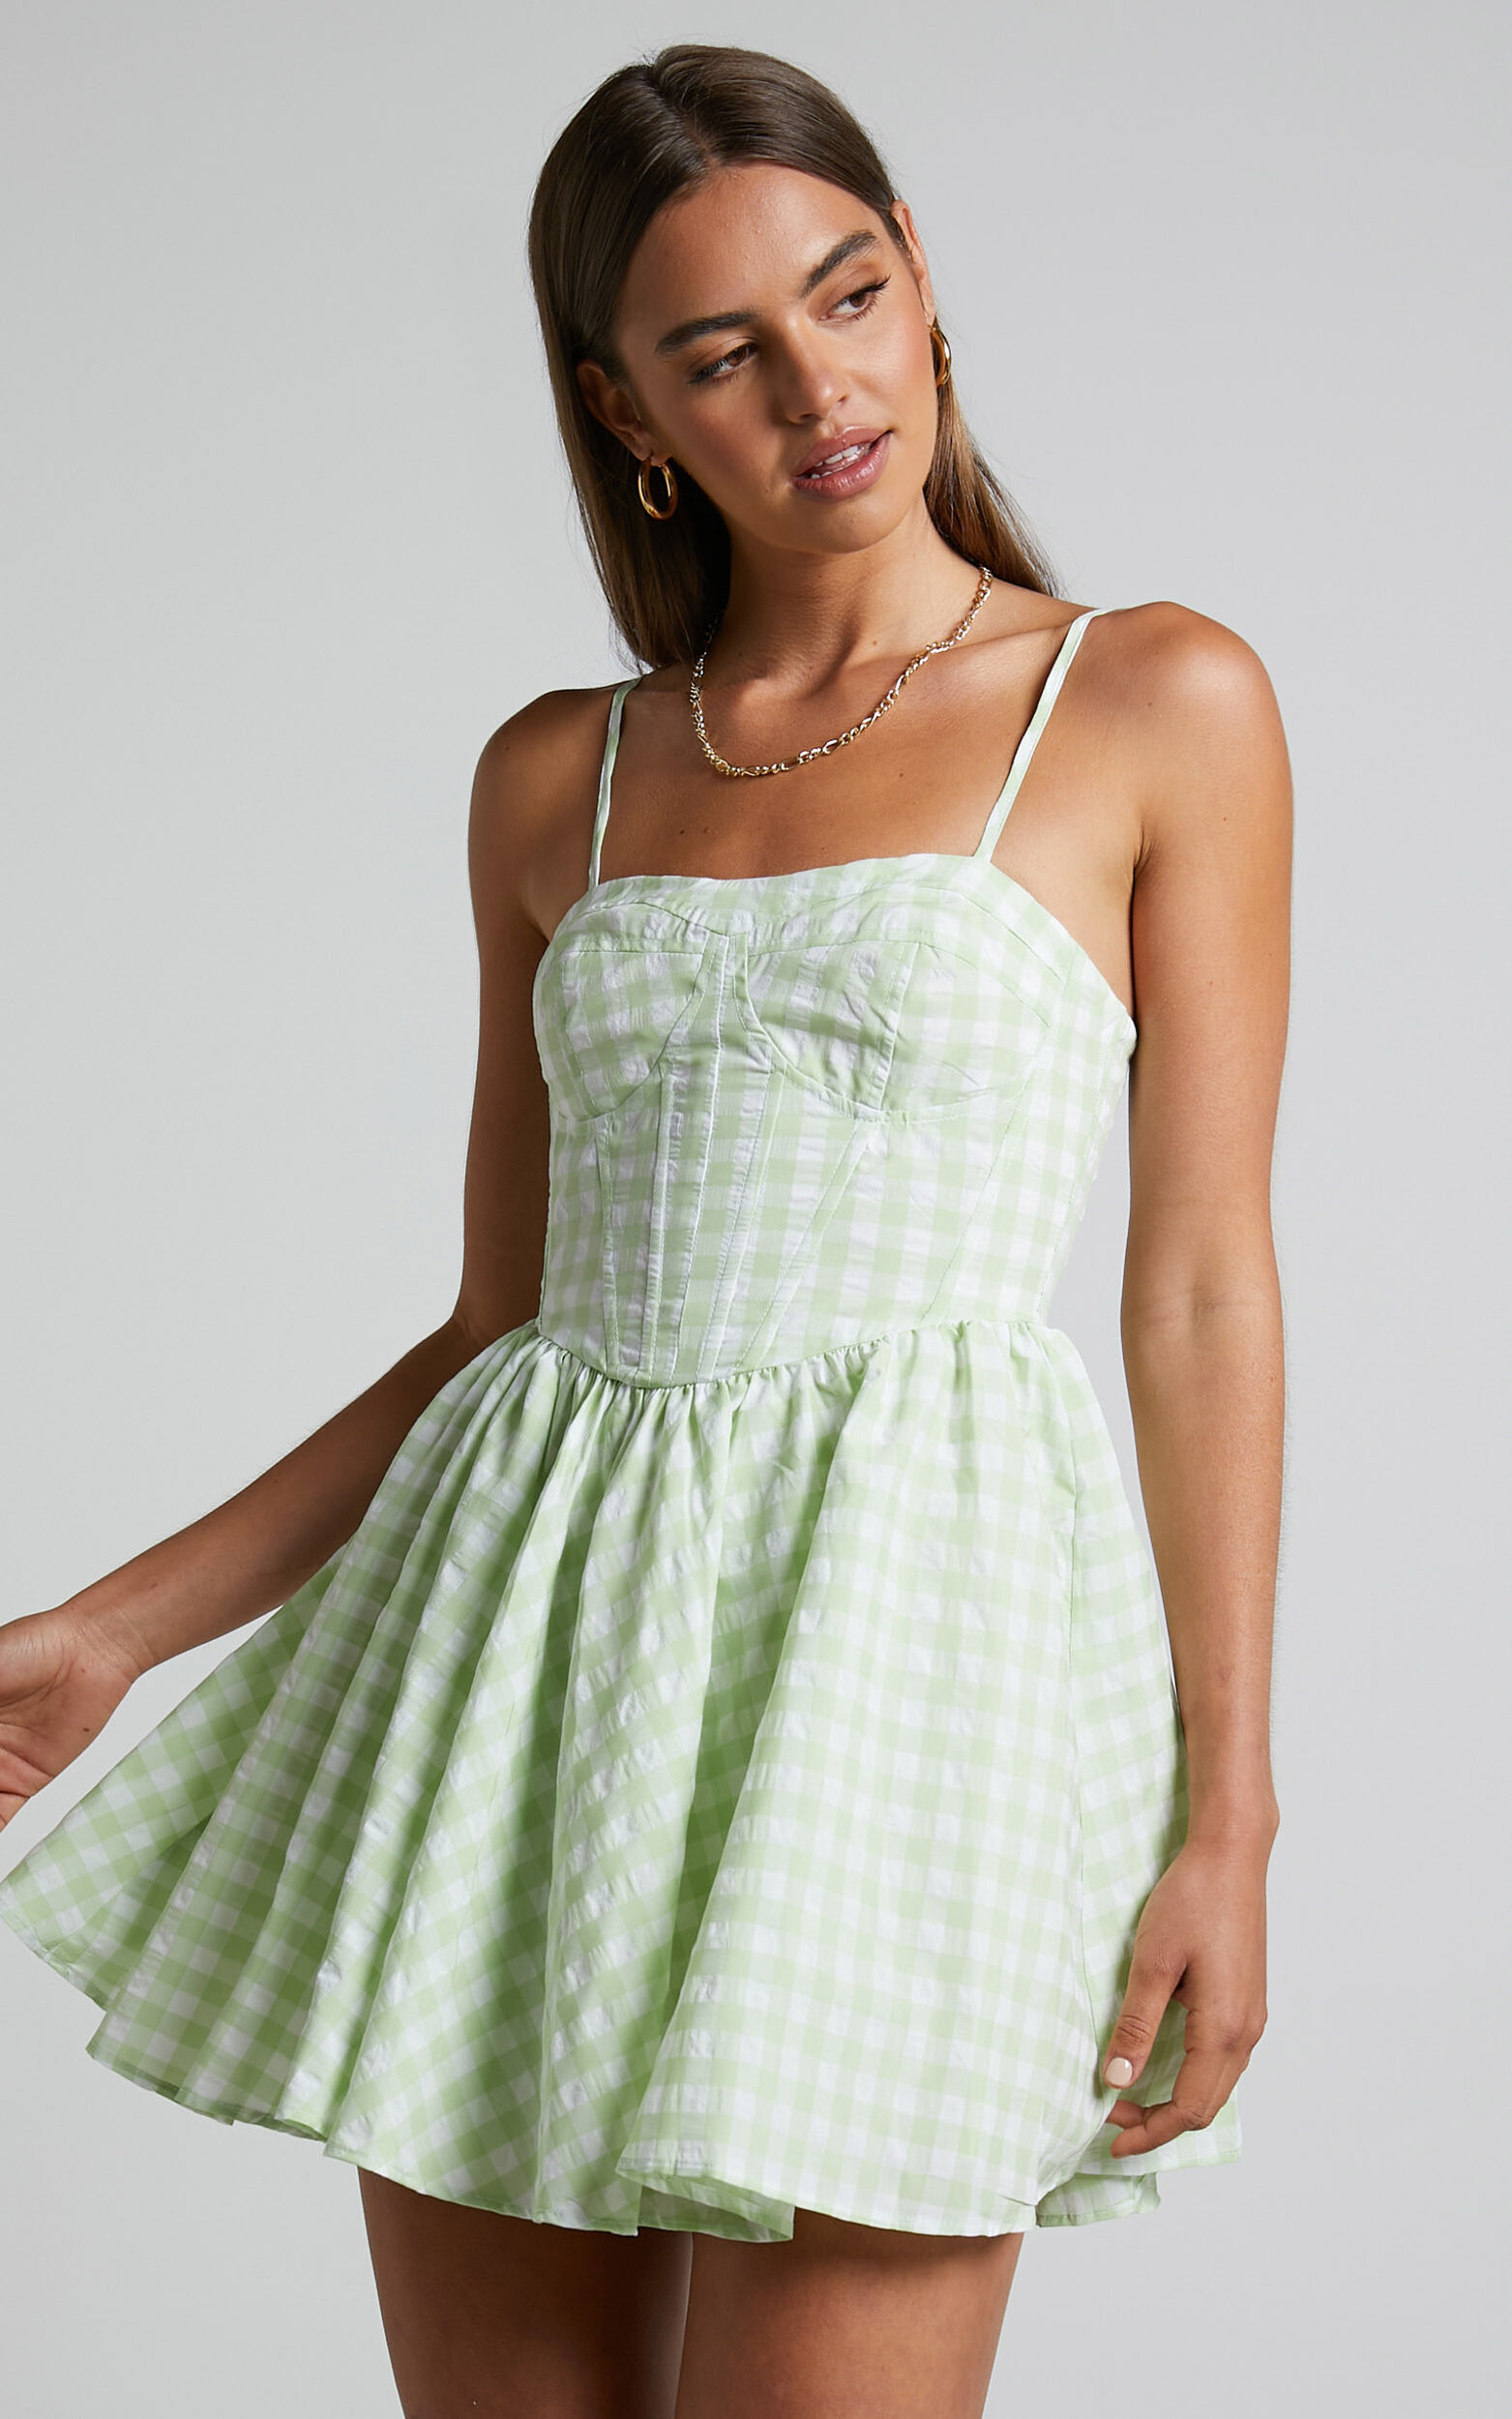 Madelyn Mini Dress - Fit and Flare Corset Dress in Mint Green Gingham - 06, GRN1